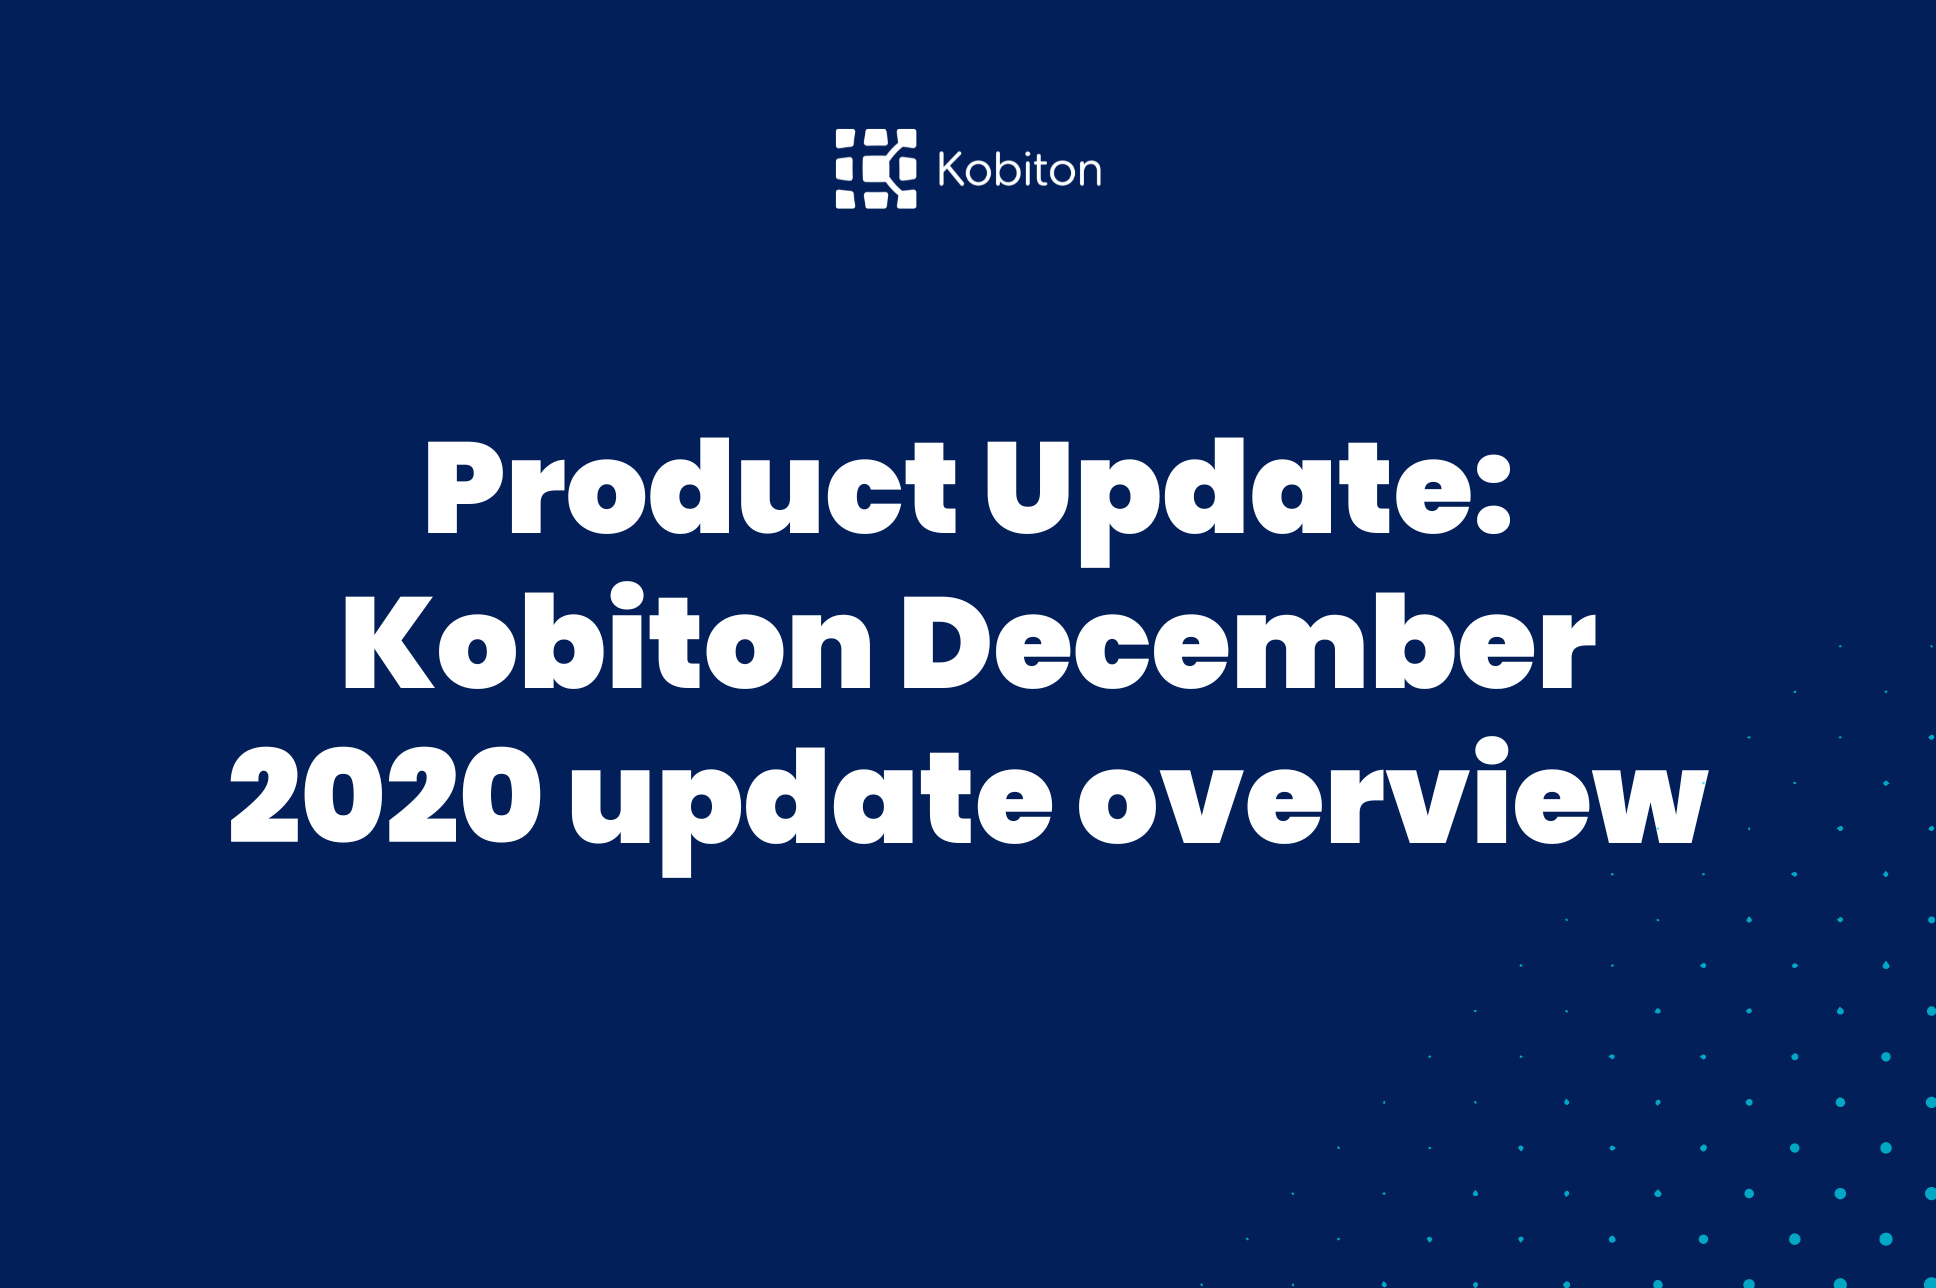 Product update: kobiton December 2020 update overview